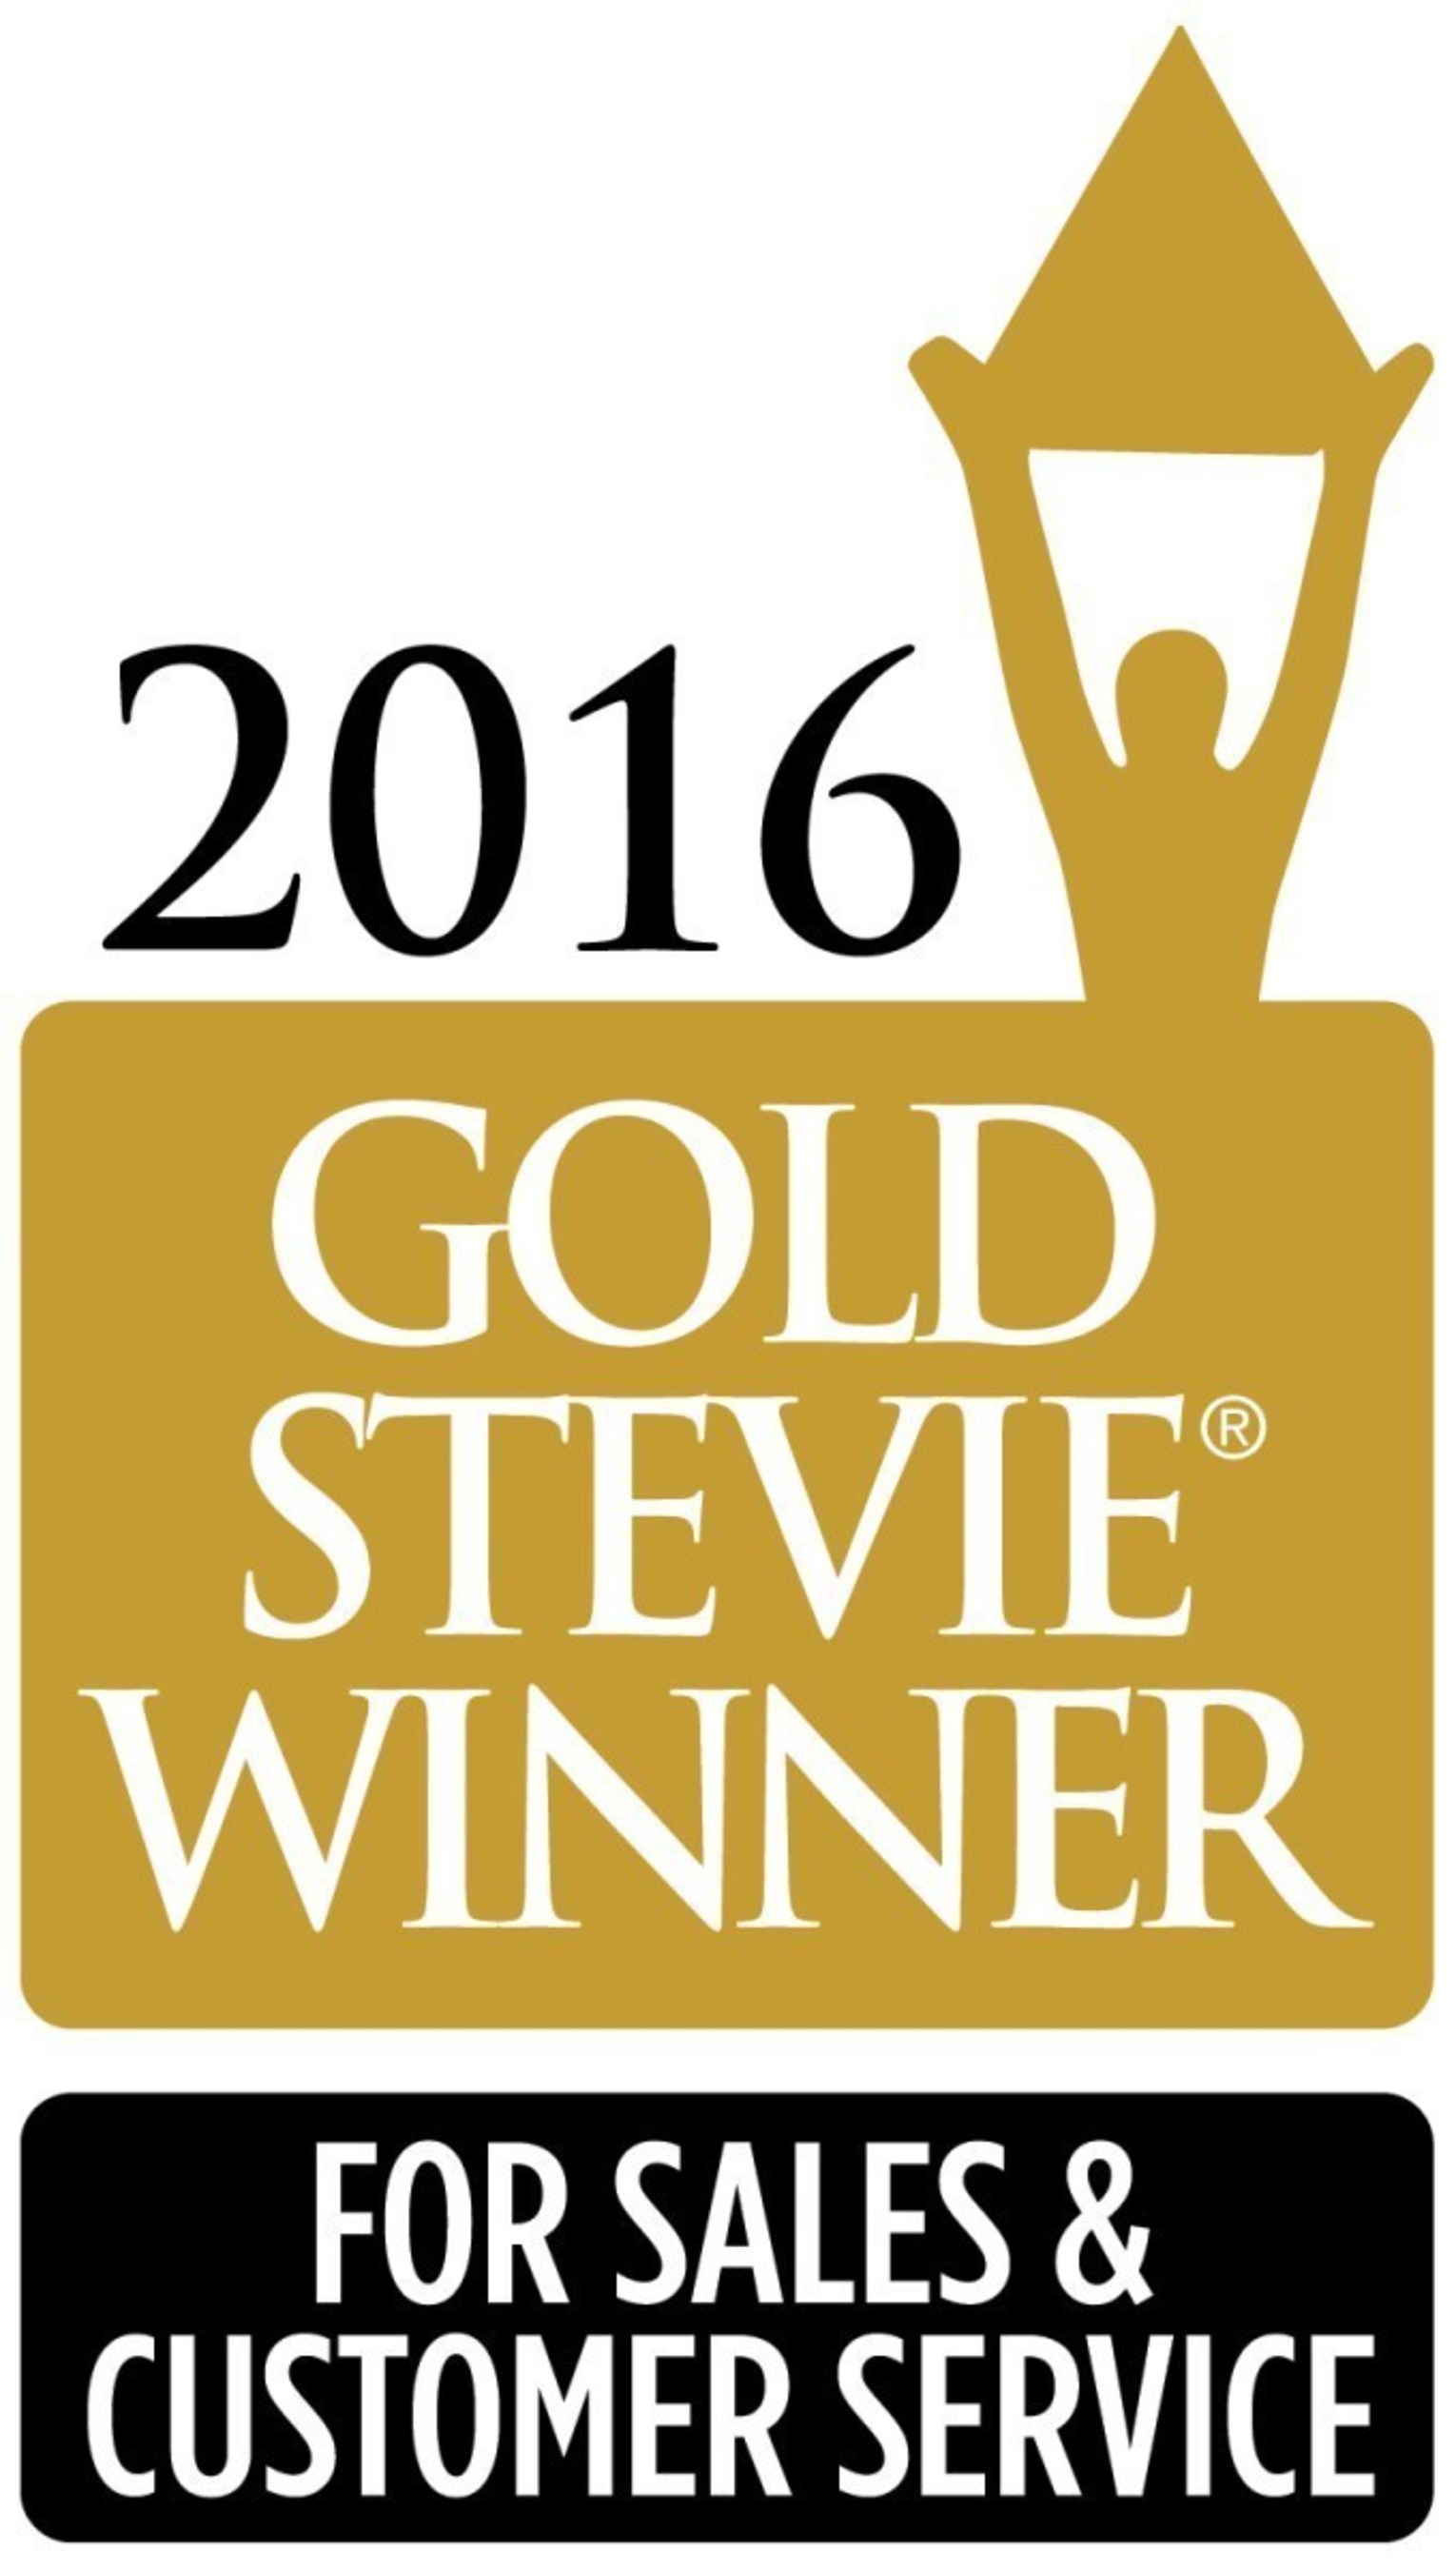 WePay takes gold at the 2016 Stevie Awards